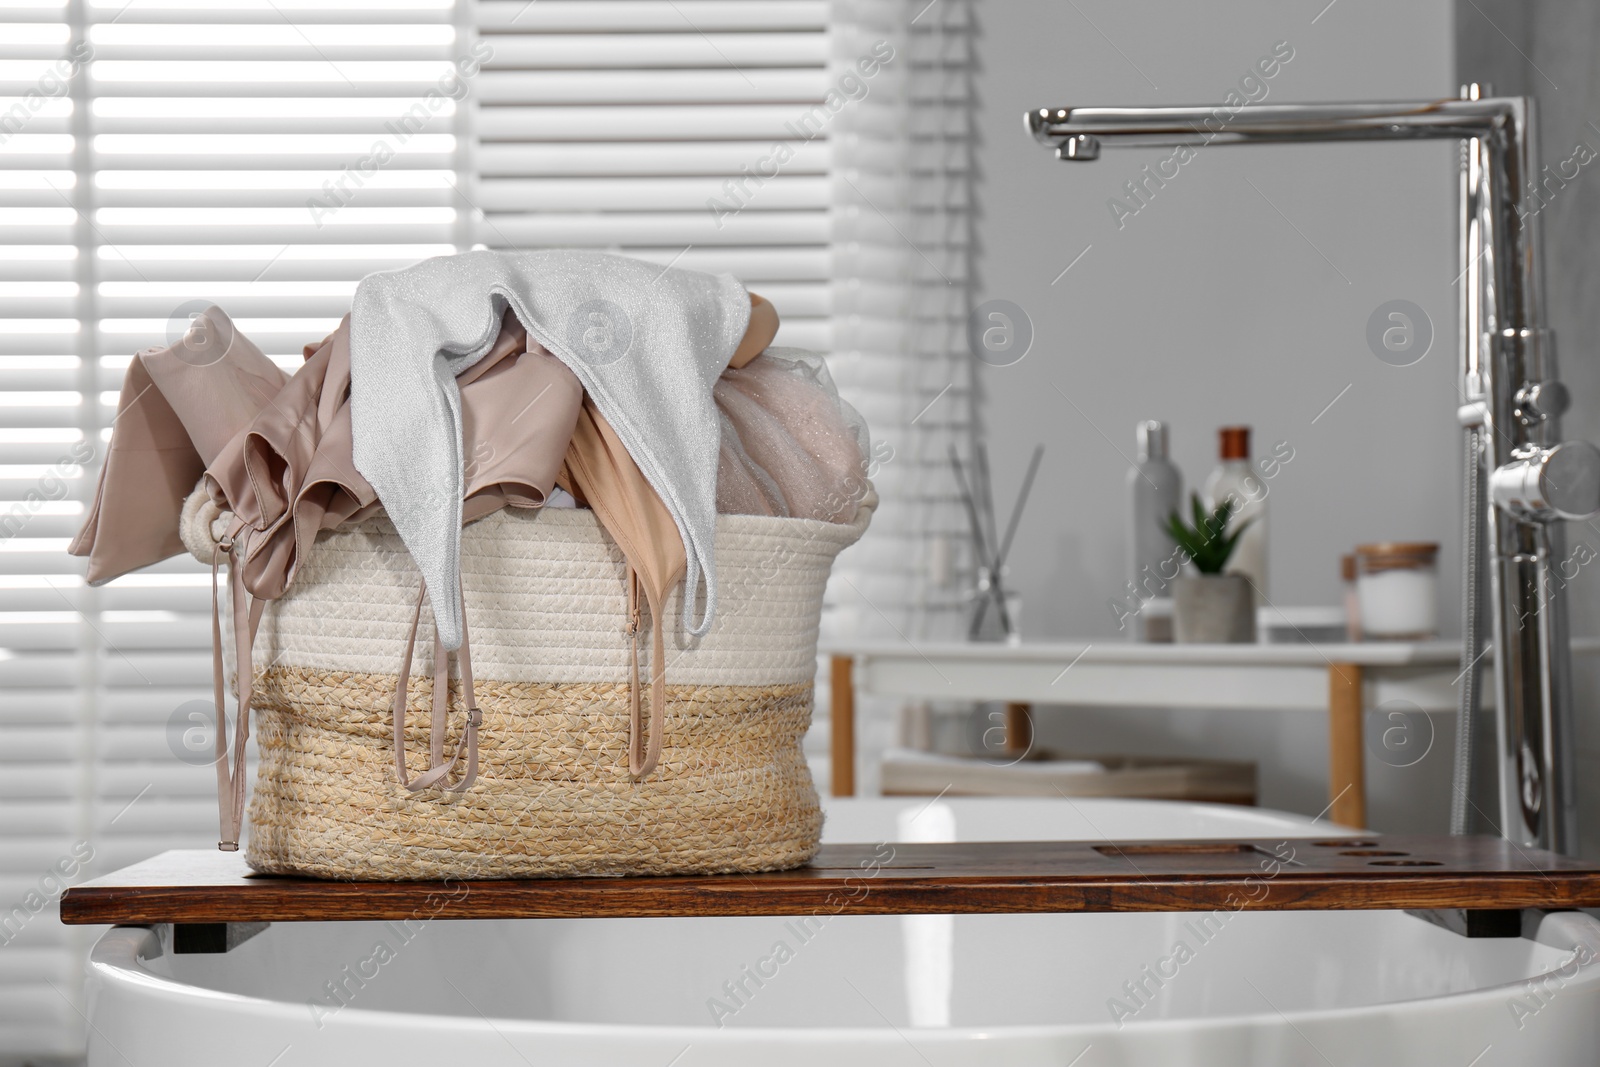 Photo of Wicker laundry basket with clothes on wooden tray in bathroom